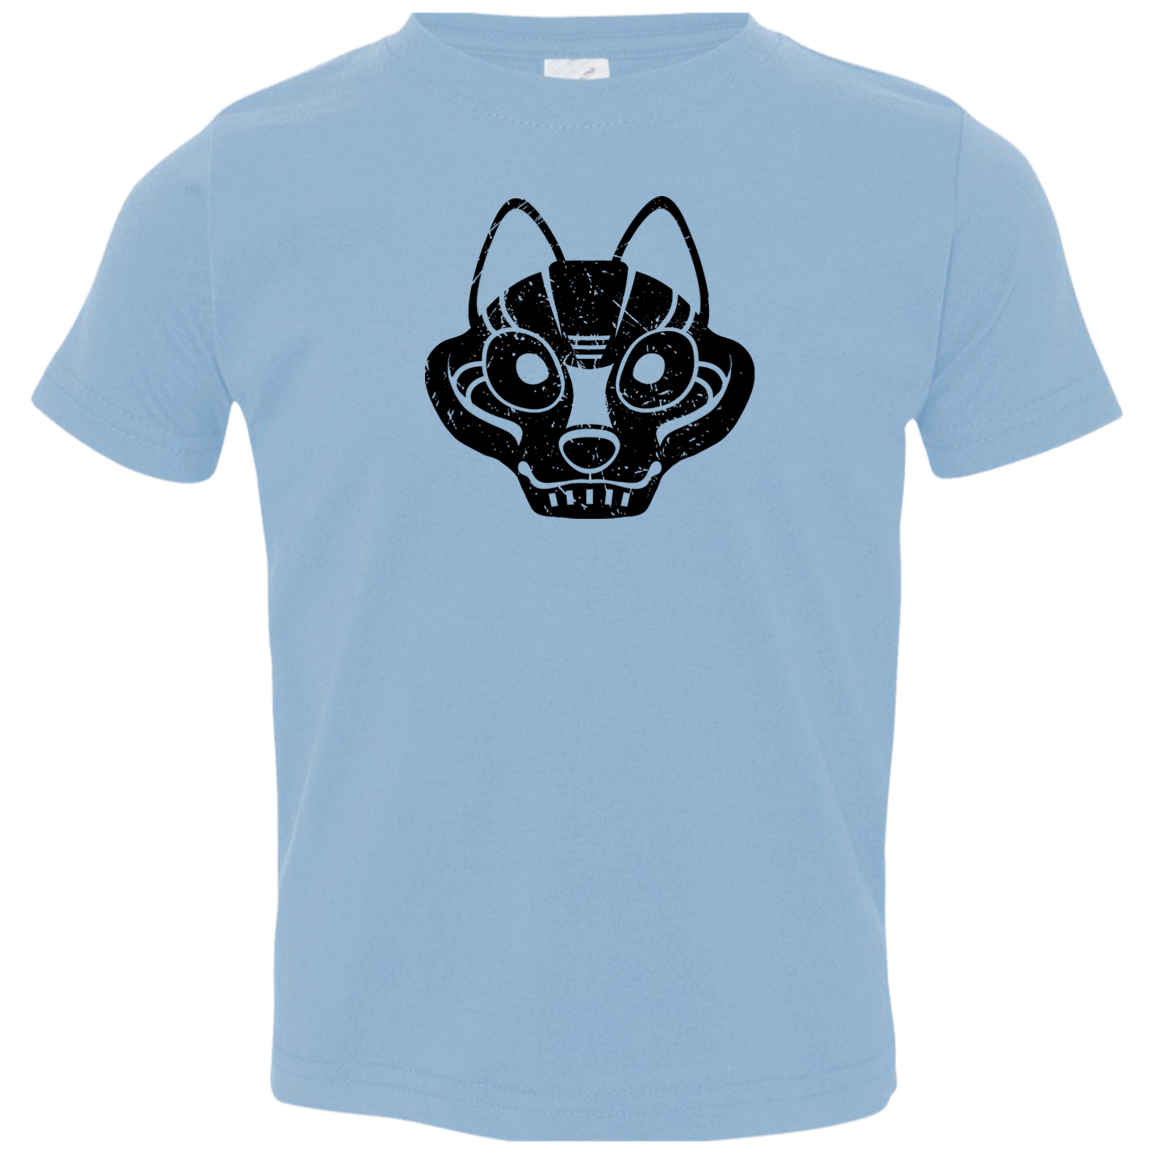 Black Distressed Emblem T-Shirt for Toddlers (Wolf Squad) - Dark Corps